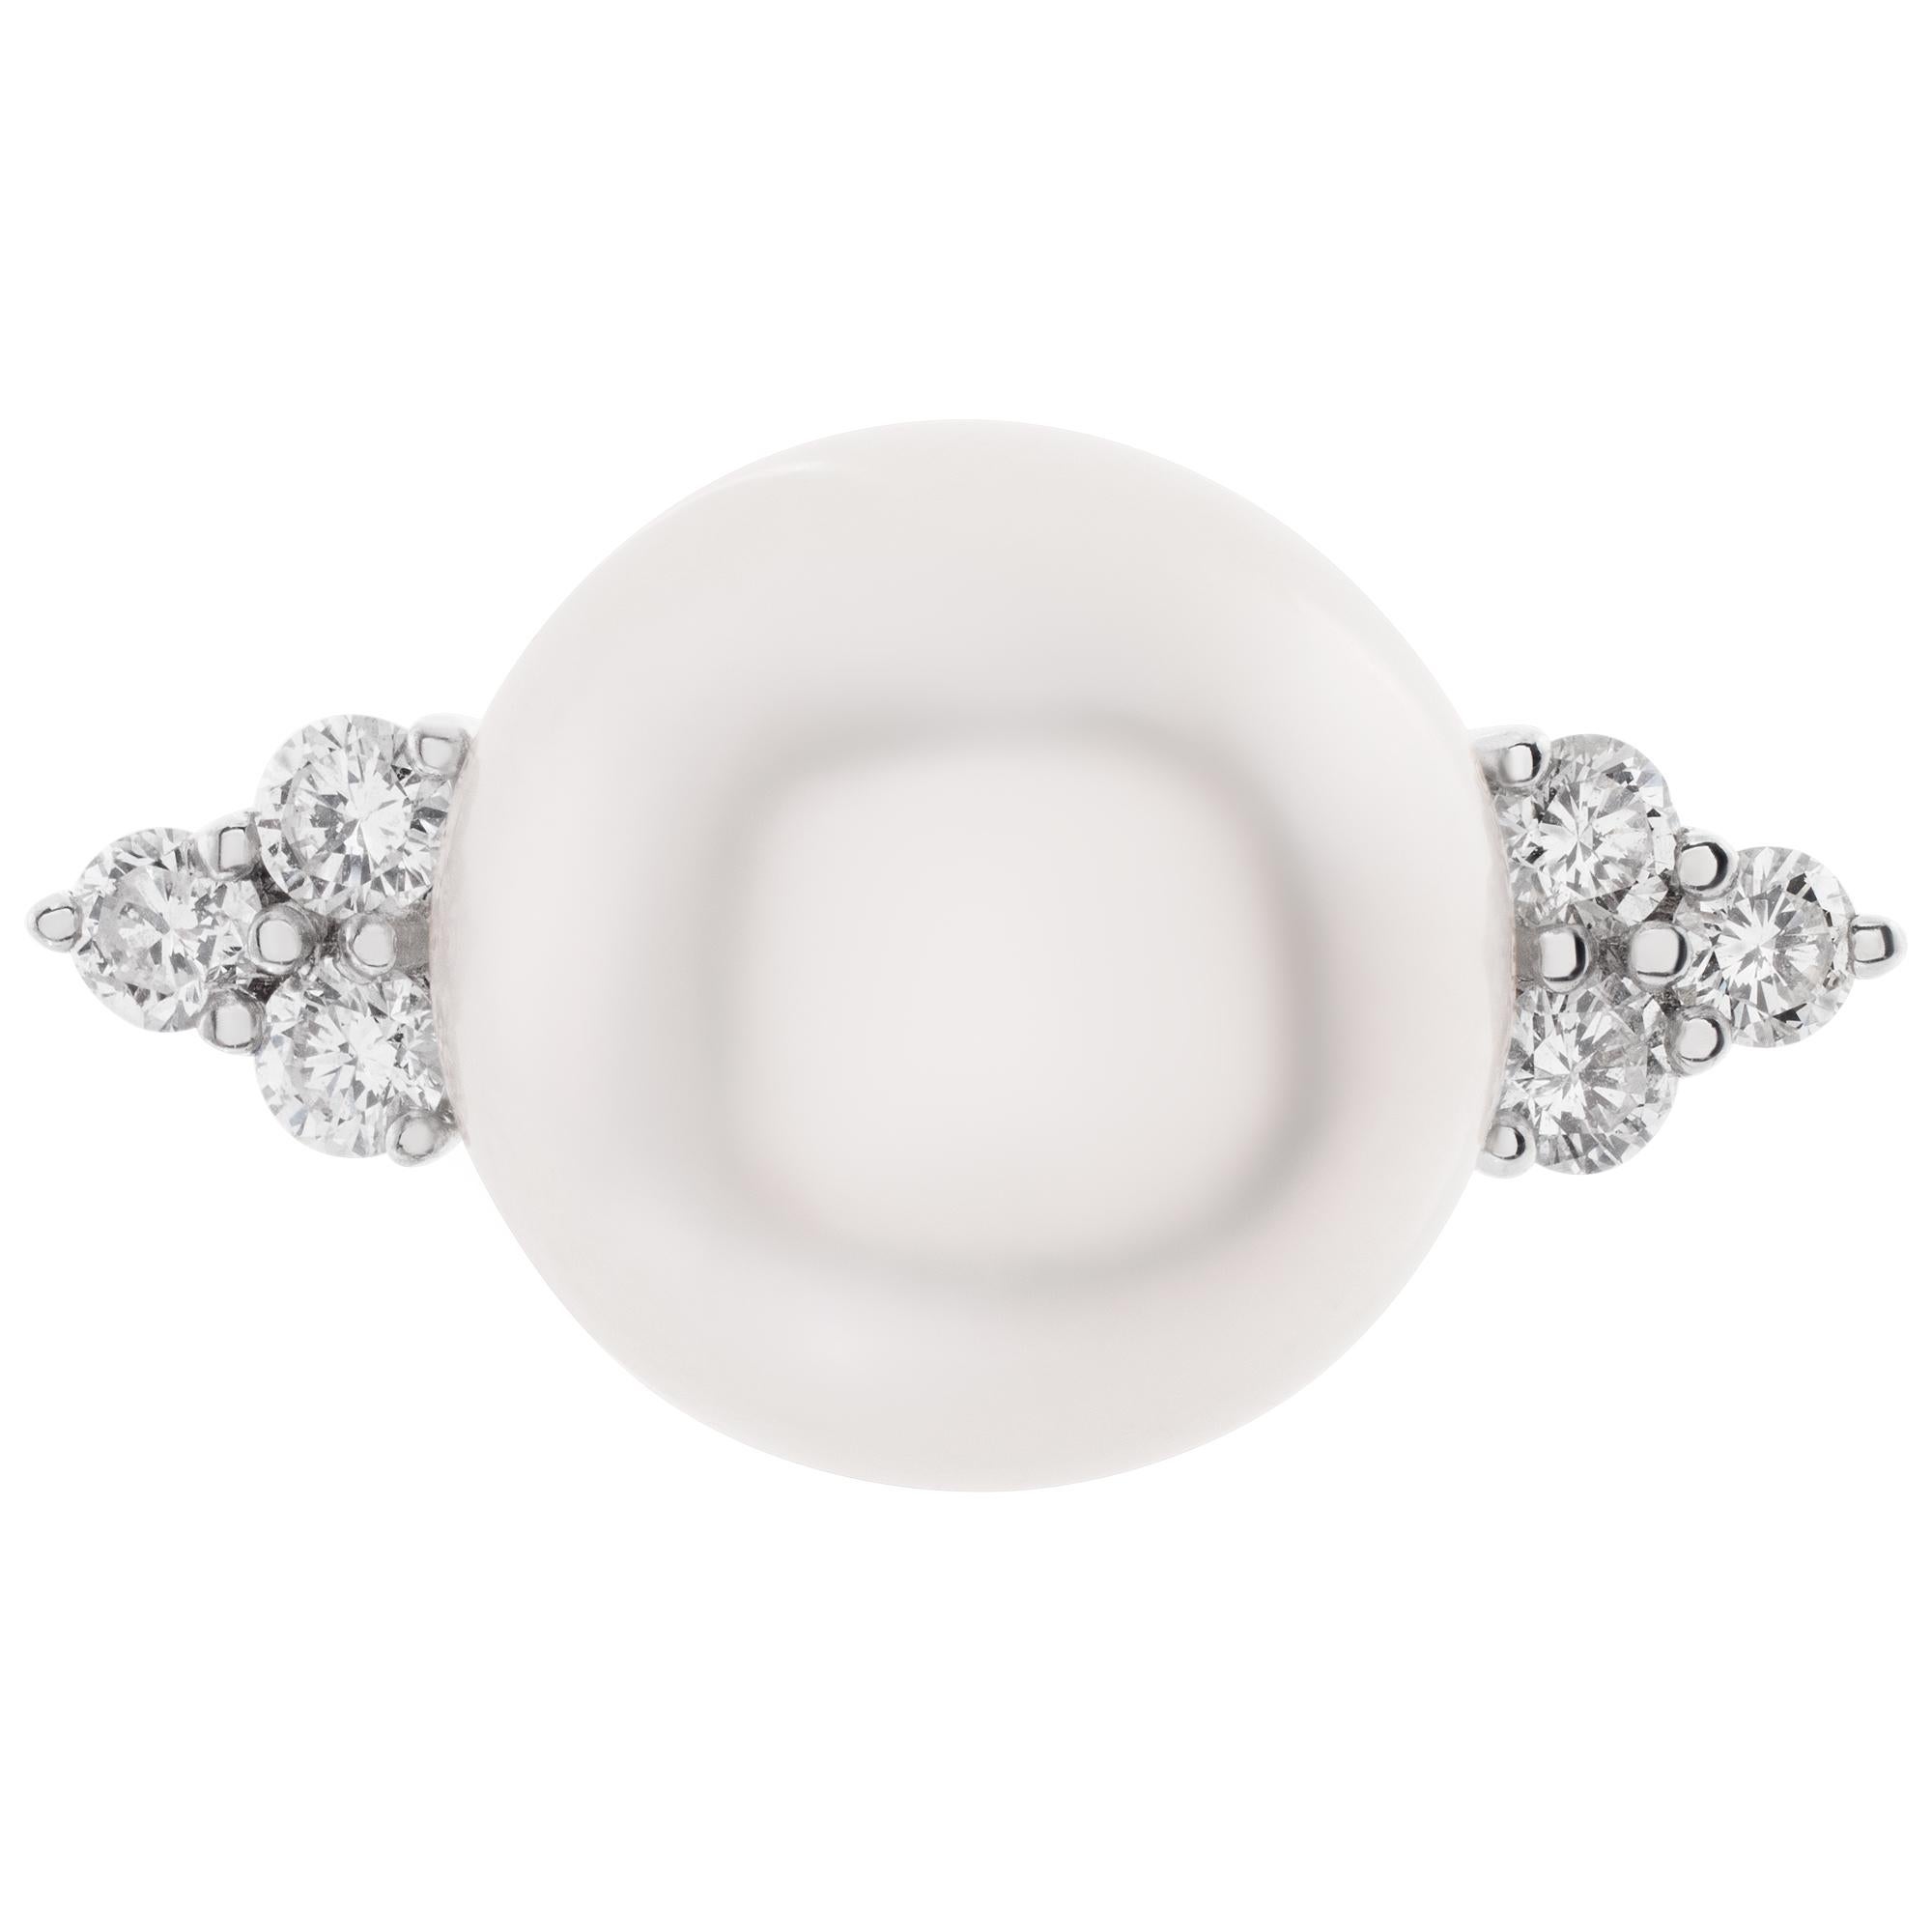 South Sea pearl & diamonds ring set in 18K white gold. South Sea pearl: 15 x 15.5mm. Round brilliant cut diamonds total approx weight: 0.36 carat, estimate: G-H color, VS-SI clarity. Size 6.75This Pearl/diamond ring is currently size 6.75 and some